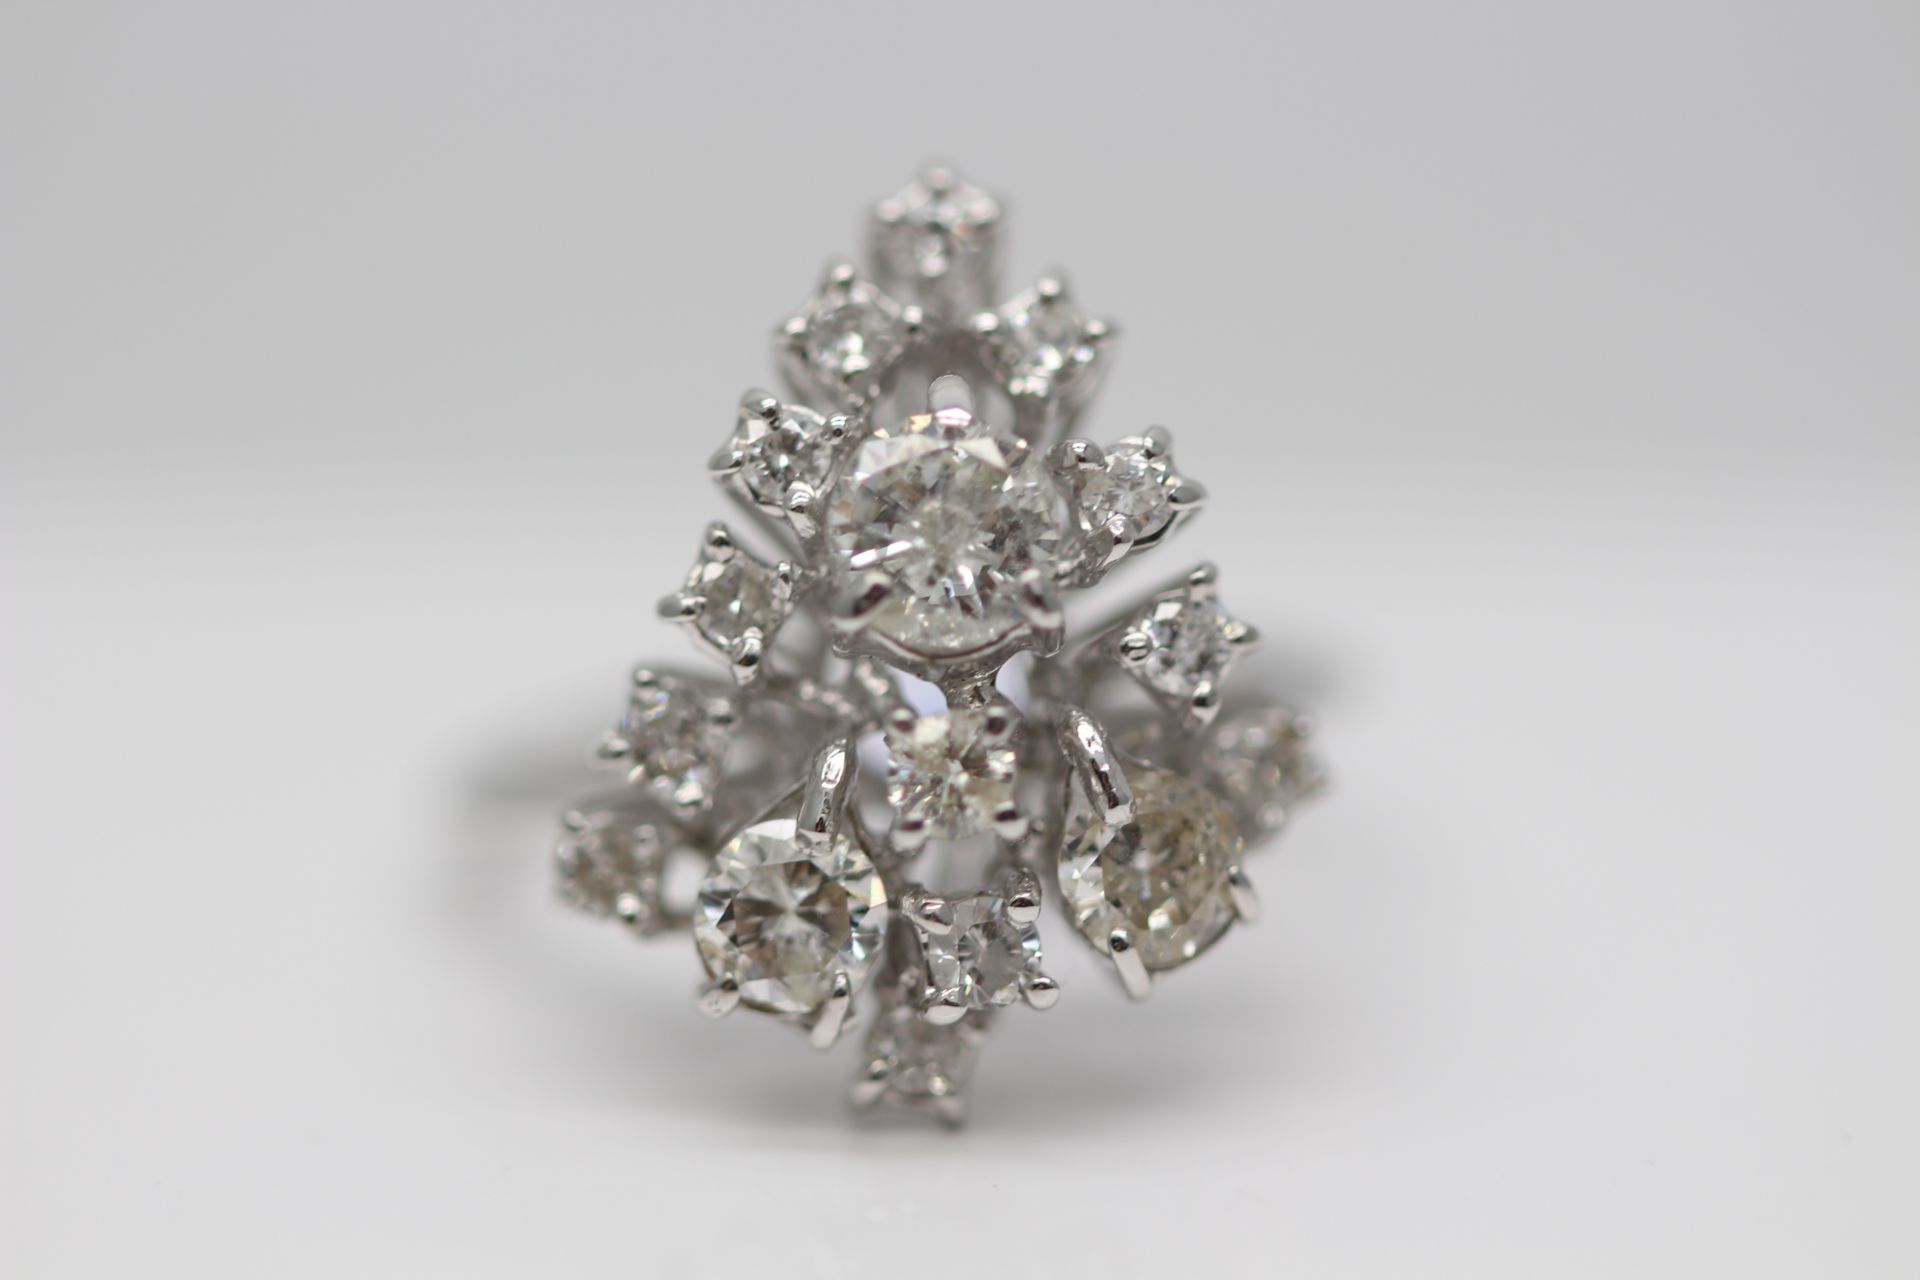 WHITE GOLD LADIES DIAMOND CLUSTER RING, SET WITH 1.50 CARATS OF BRILLIANT CUT DIAMOND SOLITAIRES